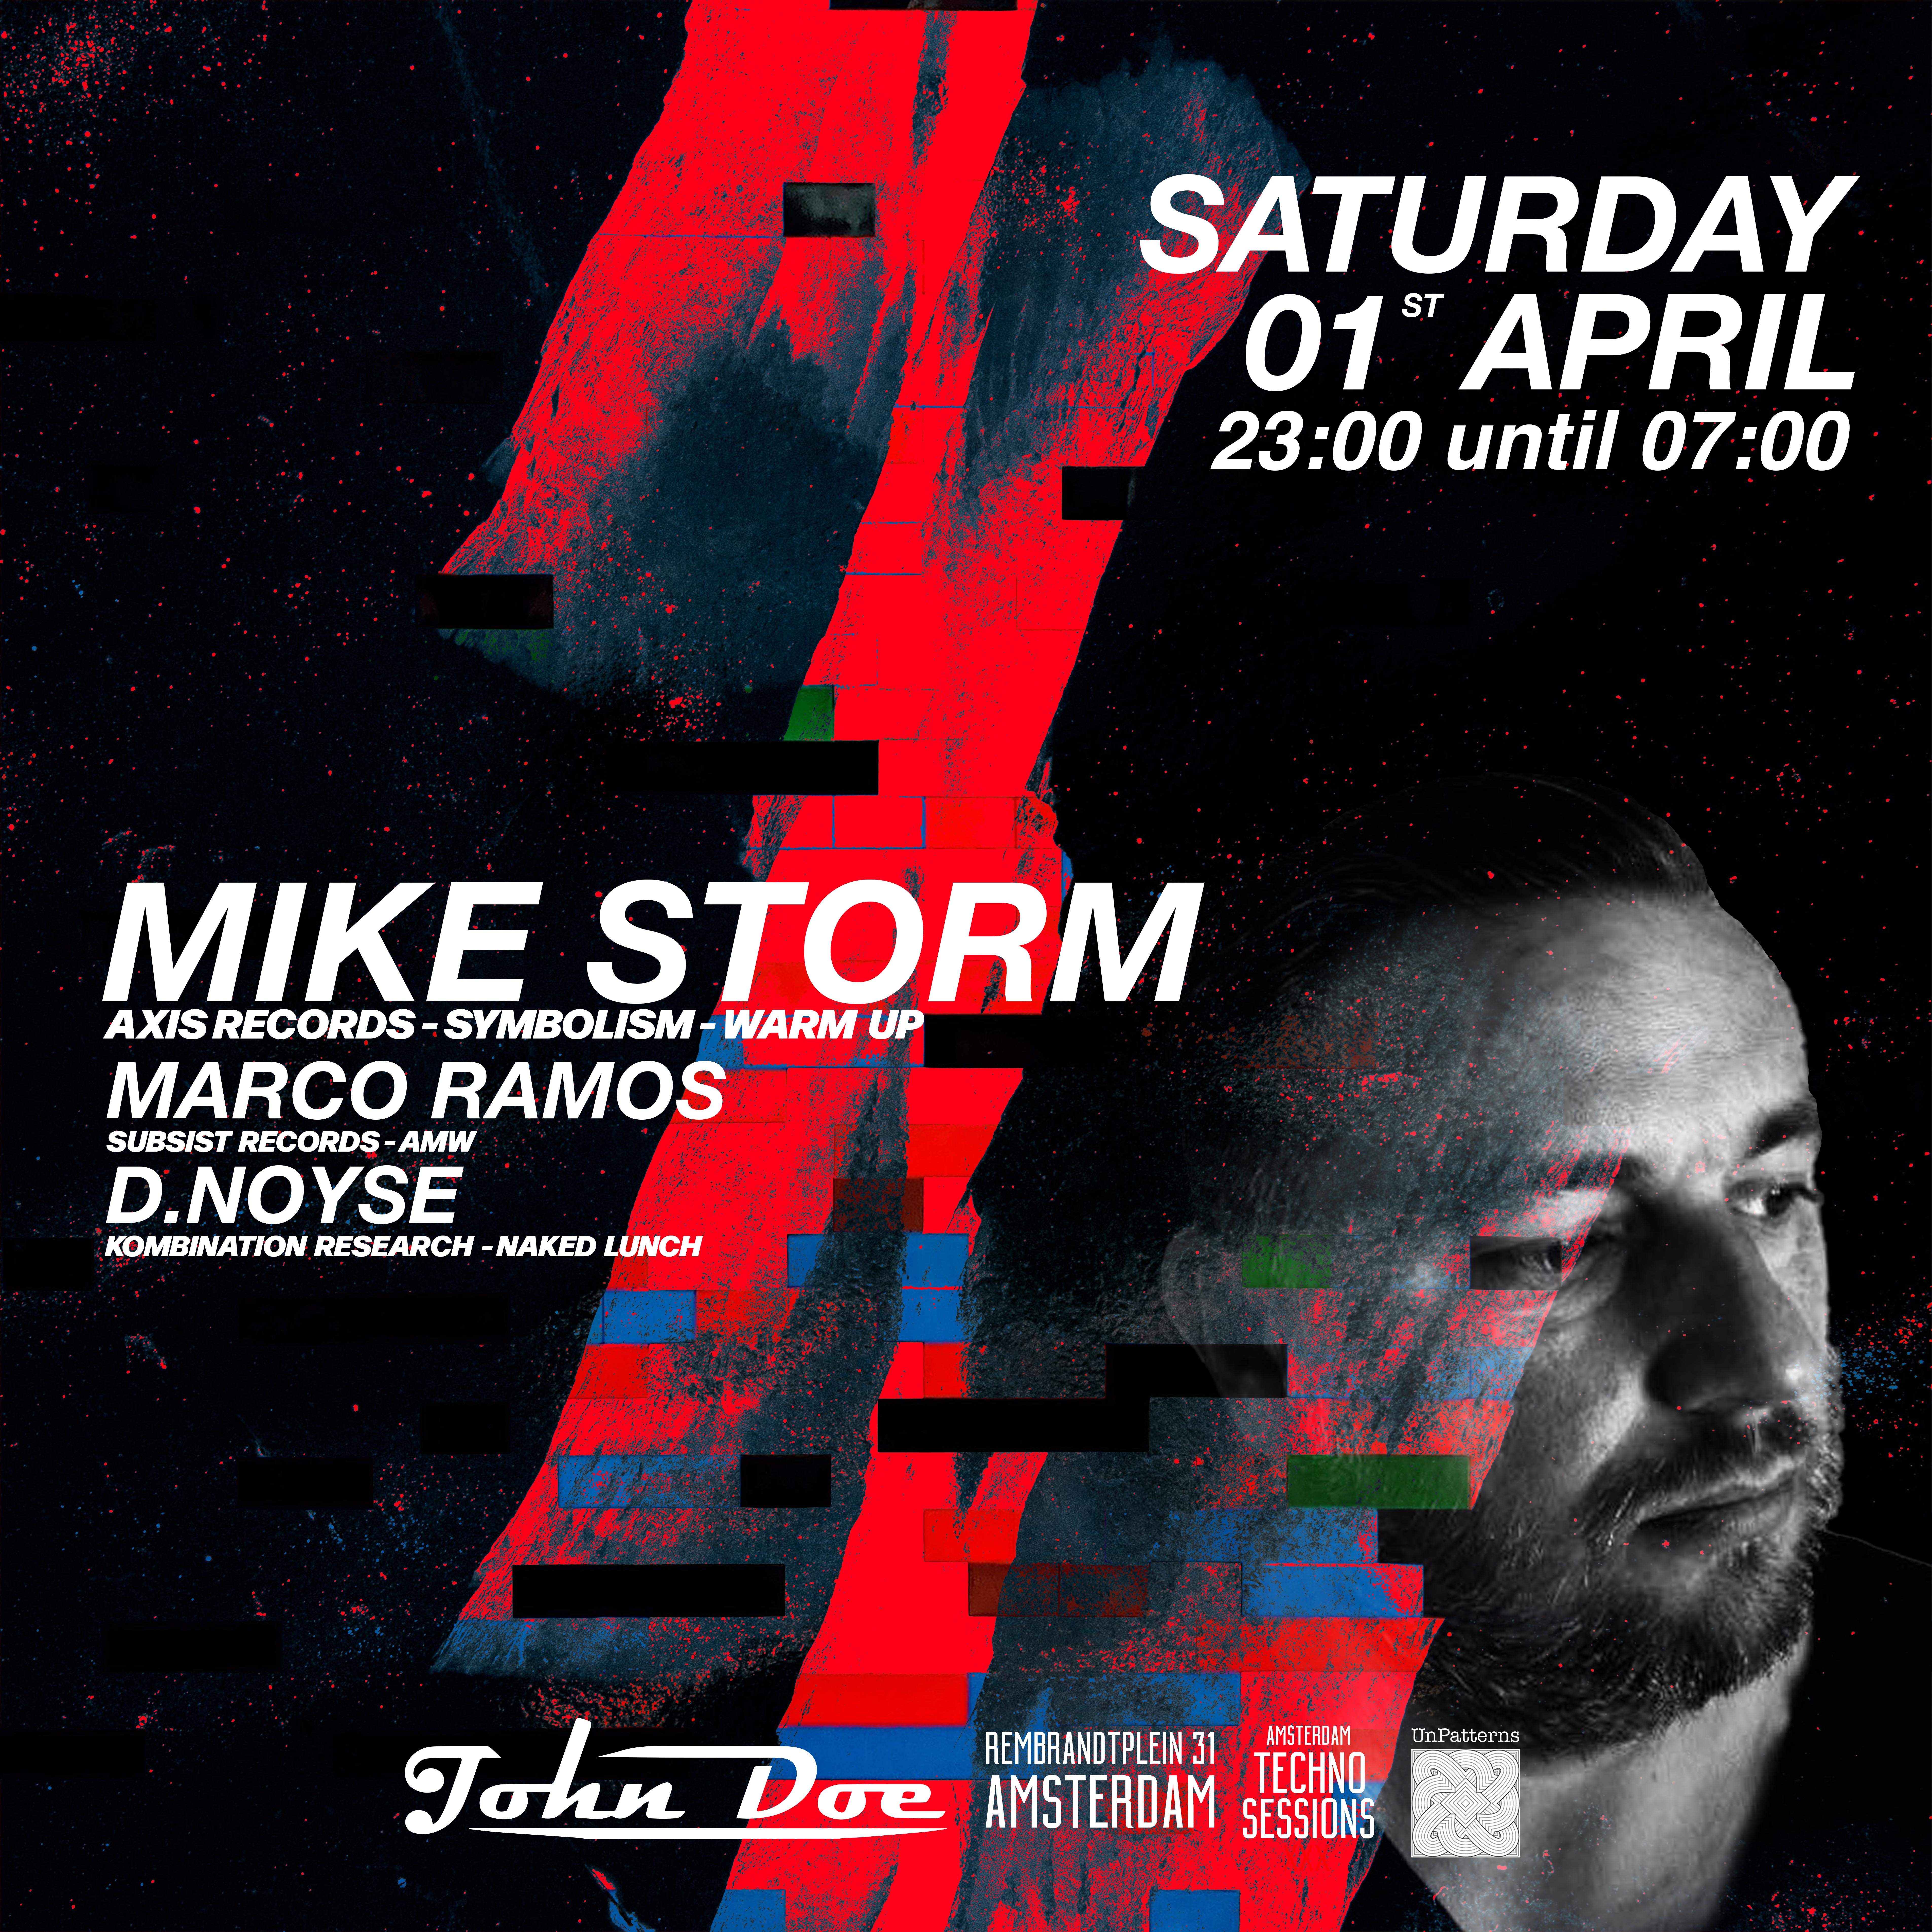 Amsterdam Techno Sessions with Mike Storm (Axis Records, Symbolism, Warm Up Recordings) - Página trasera